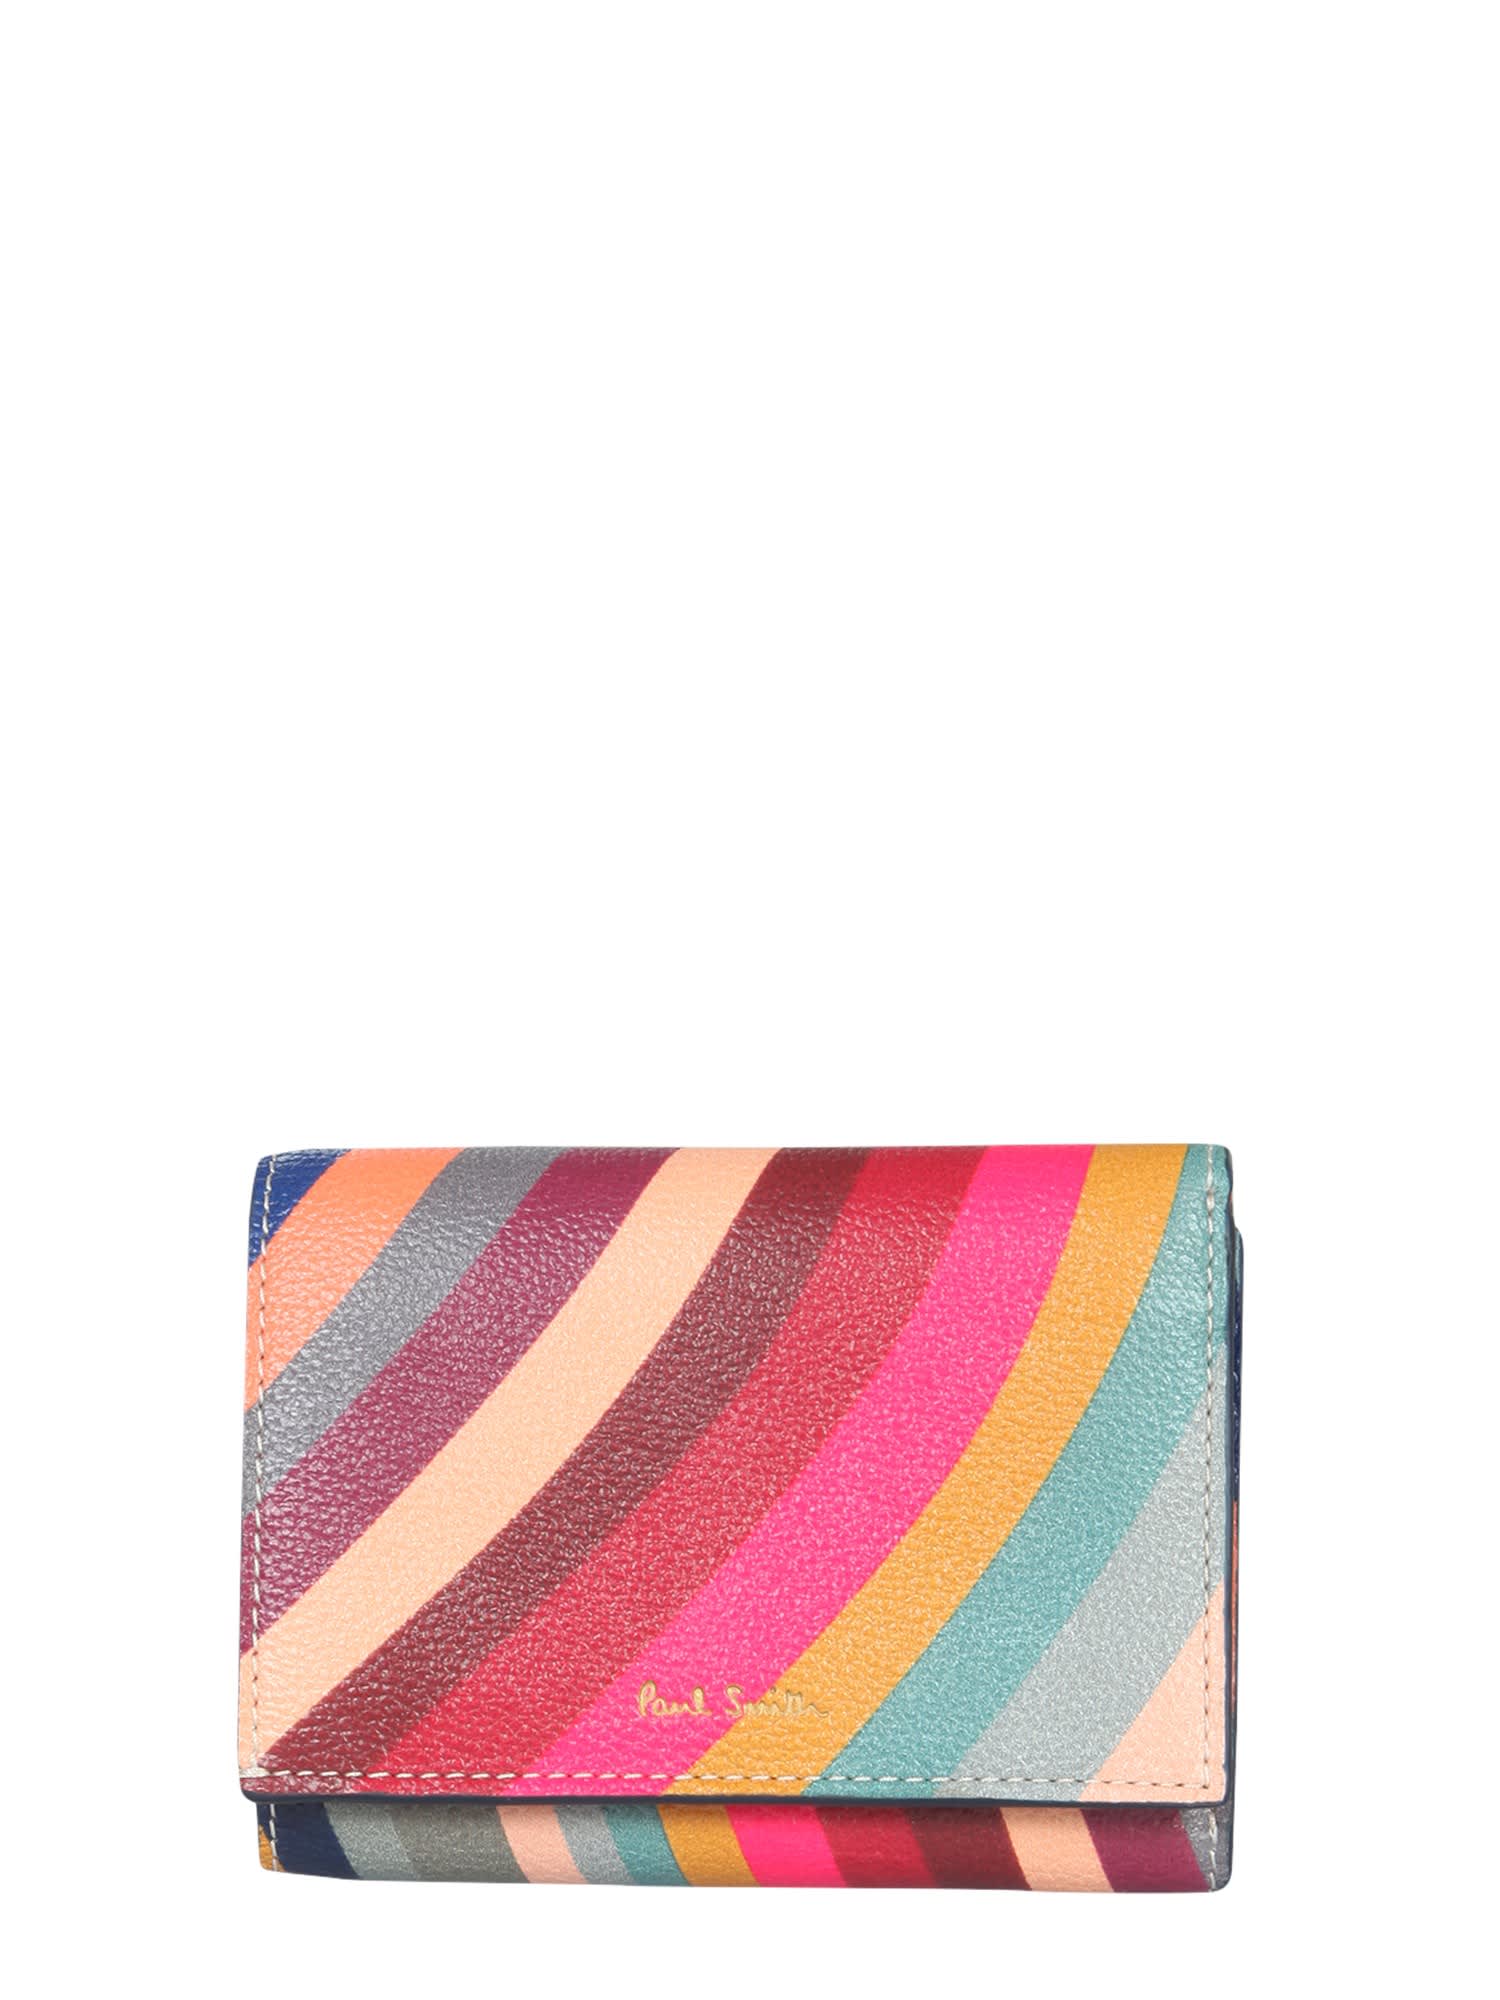 Paul Smith Small Leather Wallet